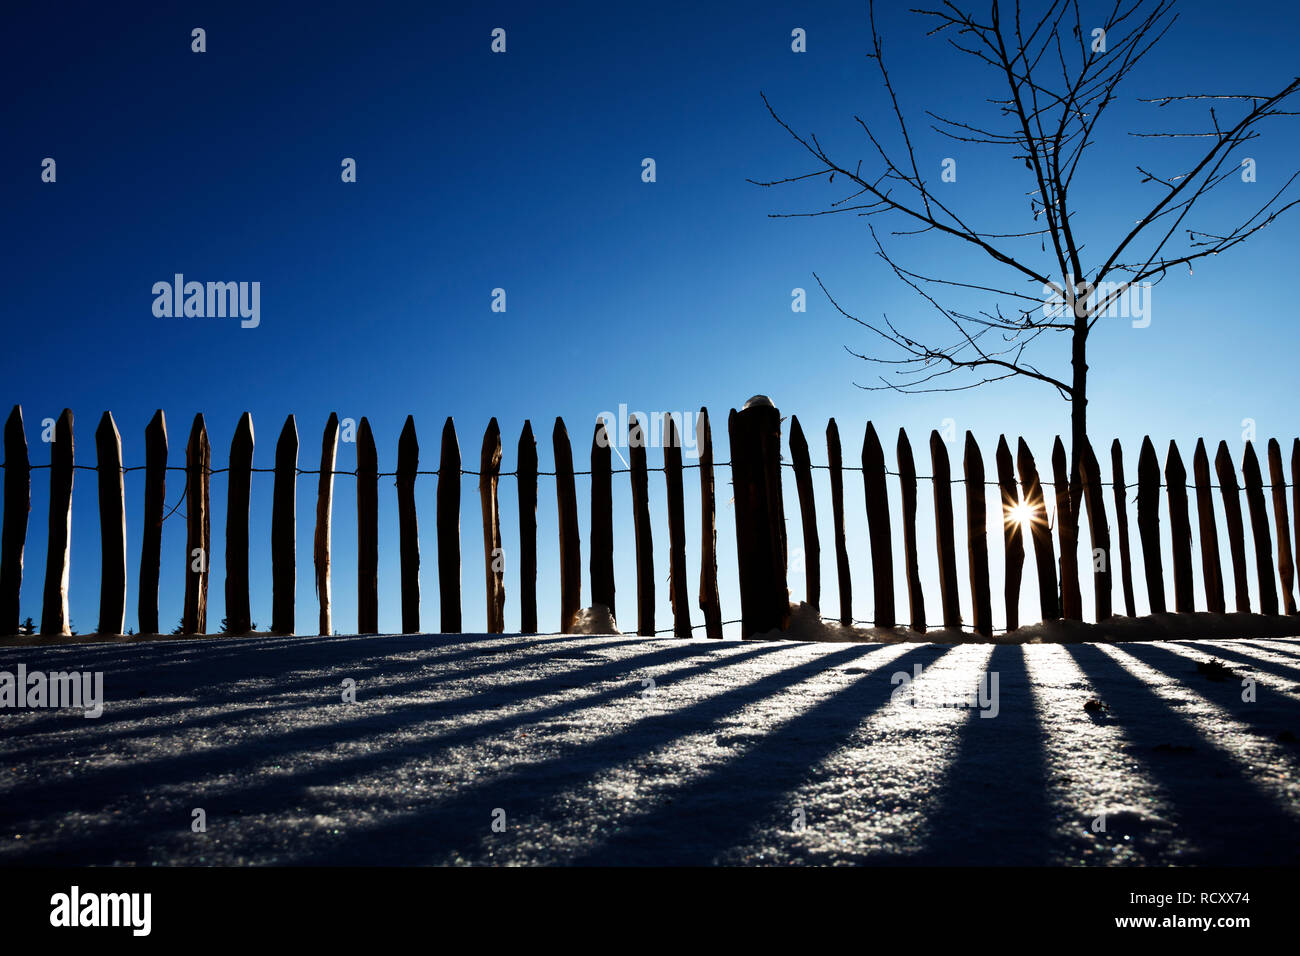 Fence in the backlight in winter Stock Photo